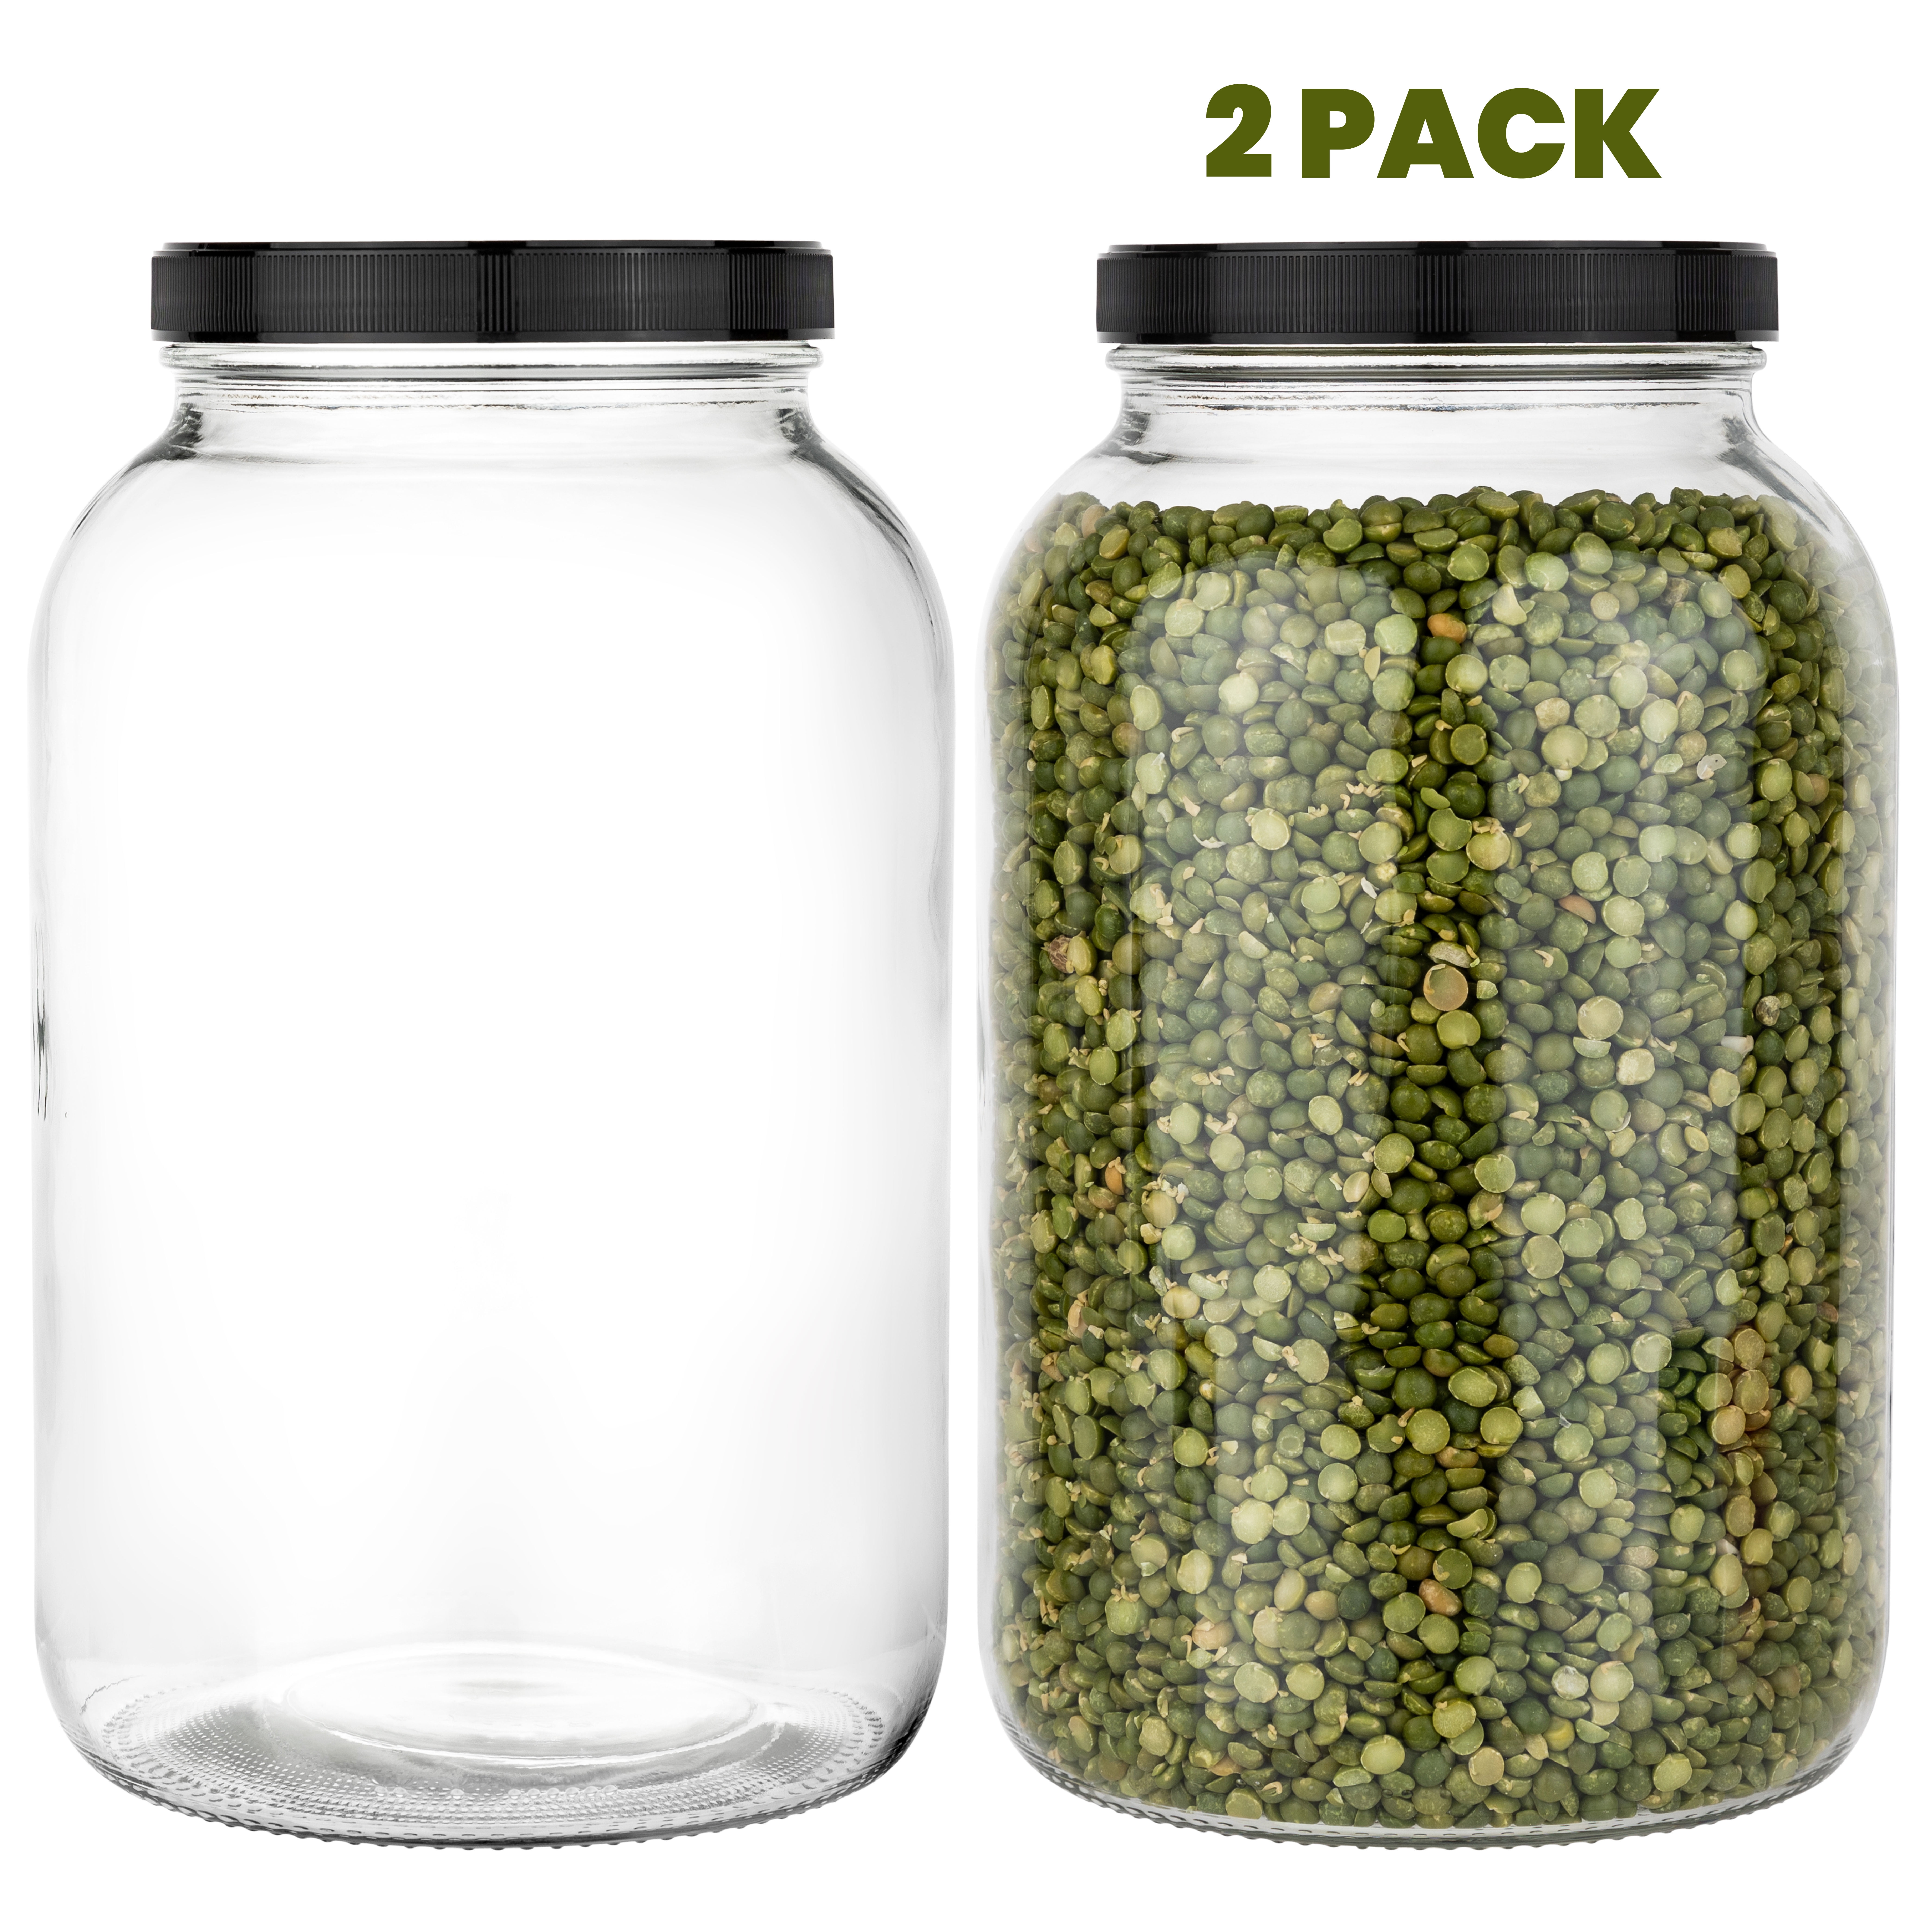 QAPPDA Mason Jars,Glass Jars With Lids 8 oz,Canning Jars For Pickles And  Kitchen Storage,Wide Mouth Spice Jars With Black Lids For